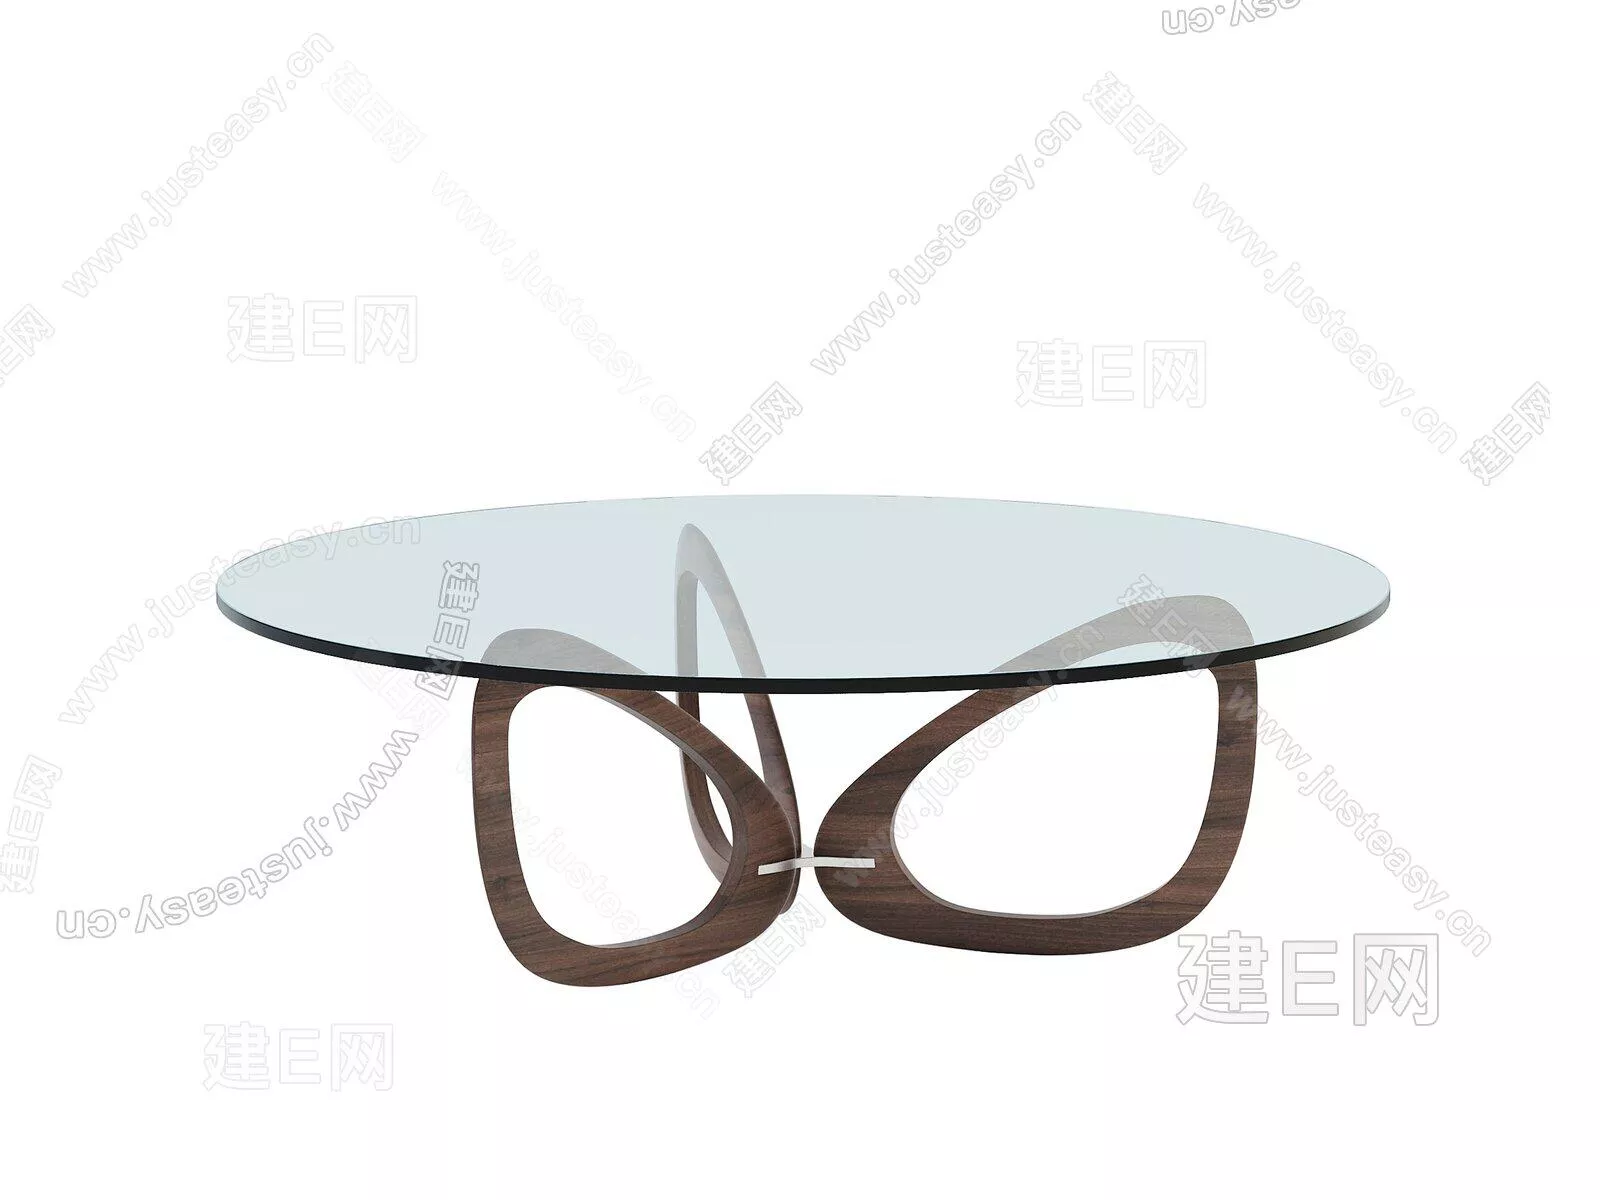 MODERN COFFEE TABLE - SKETCHUP 3D MODEL - ENSCAPE - 104941630